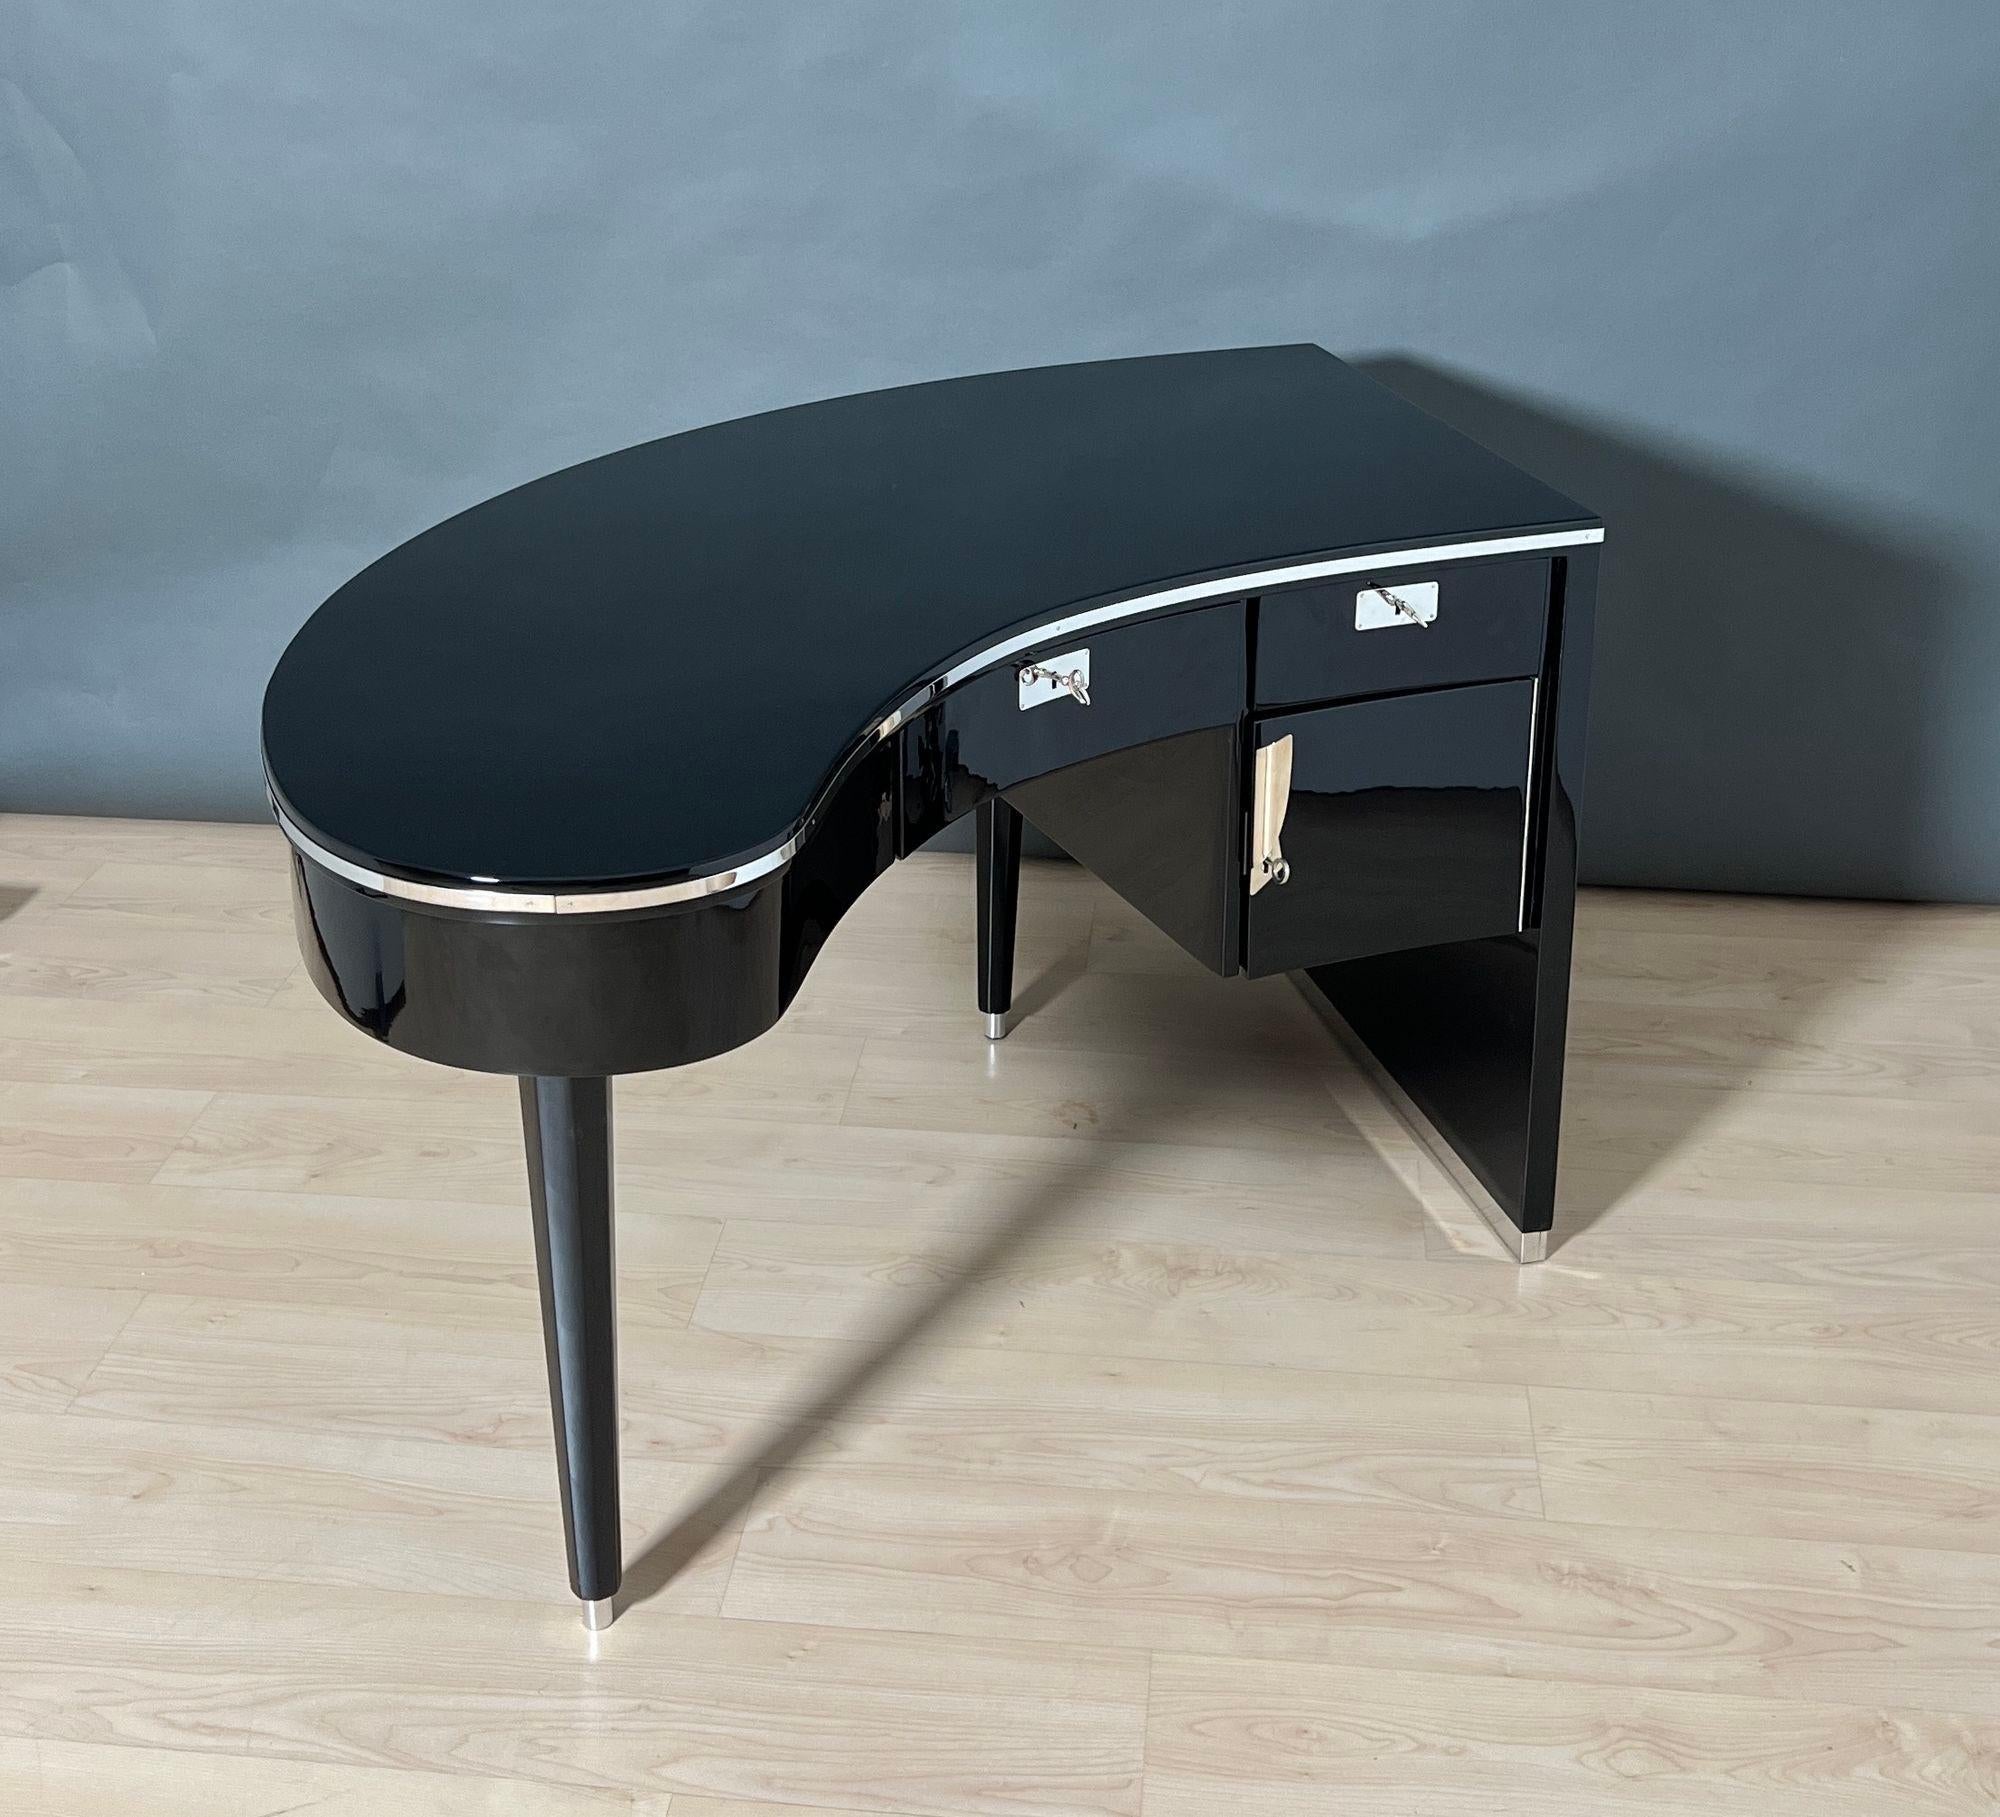 Extraordinary curved (kidney-shaped) designer desk from the 1950/60s.
Asymmetrical shape similar to that of a grand piano. Walnut, high-gloss black finish with piano lacquer. Octagonal tapered feet with metal tips. Circumferential metal trim around